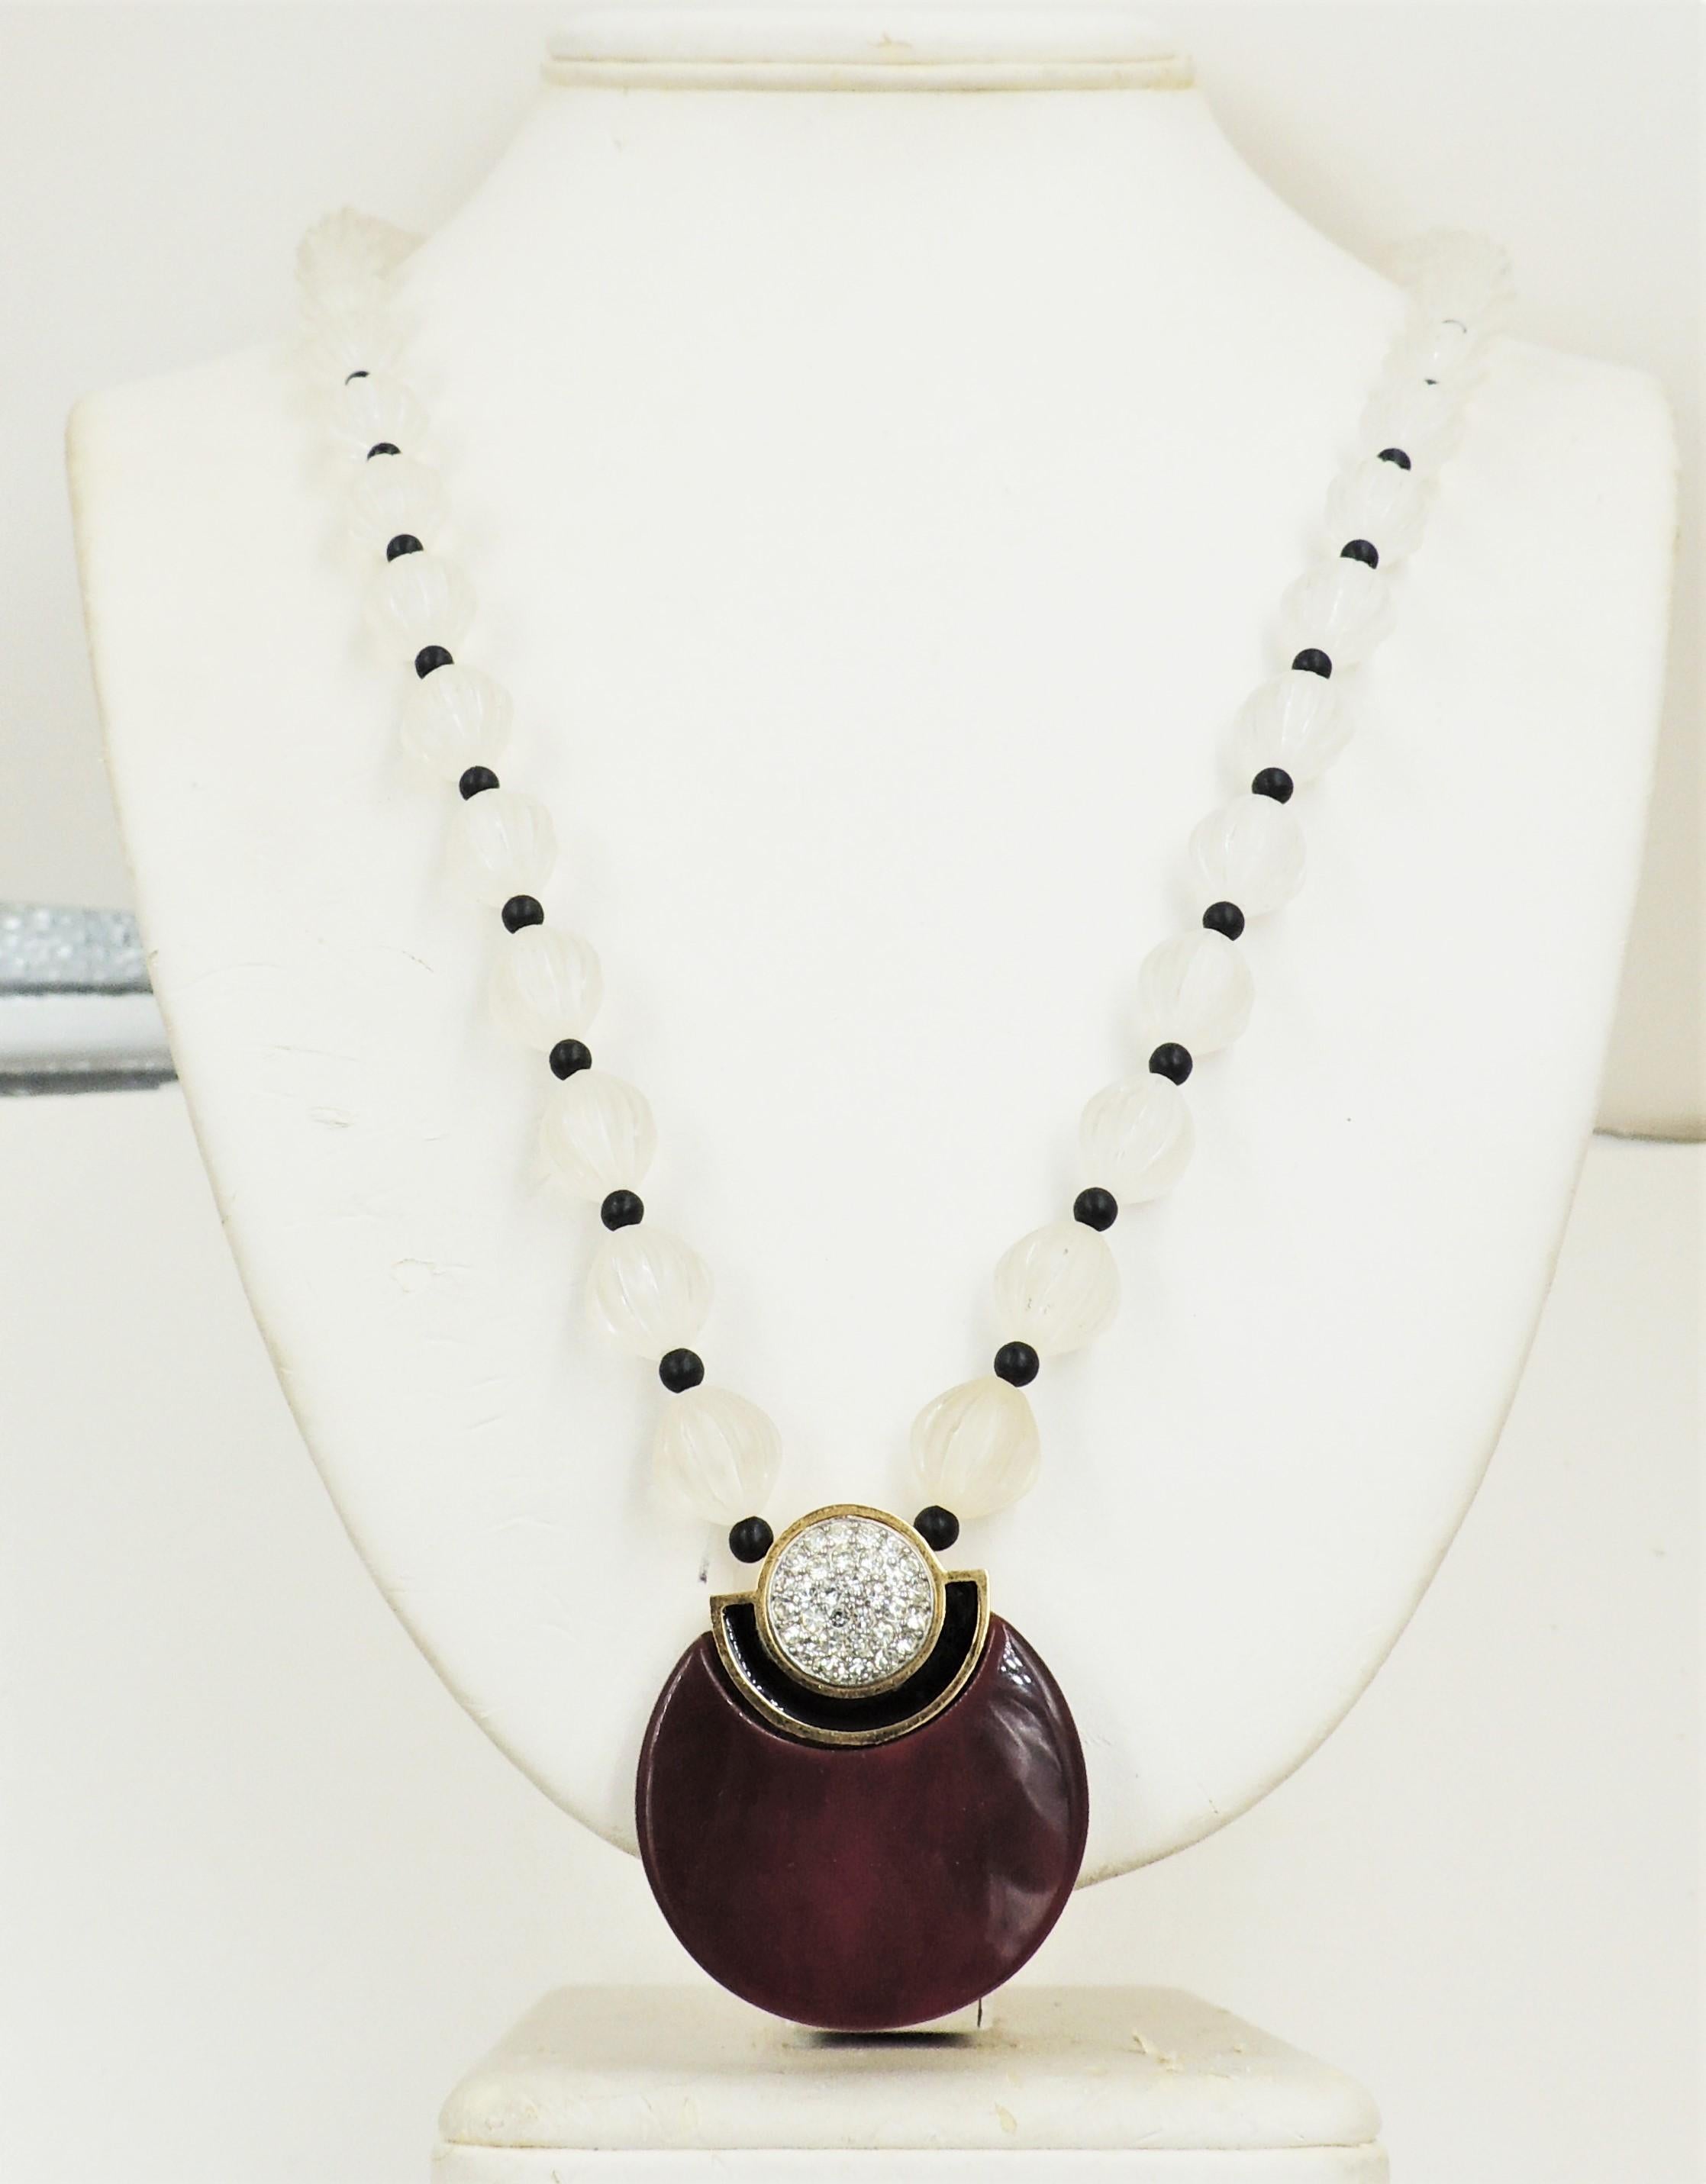 1980s Deco style maroon red/brown Lucite with black enamel and clear pave rhinestones pendant with frosted clear melon beads and black bead spacers necklace with gg fold over clasp. Marked 